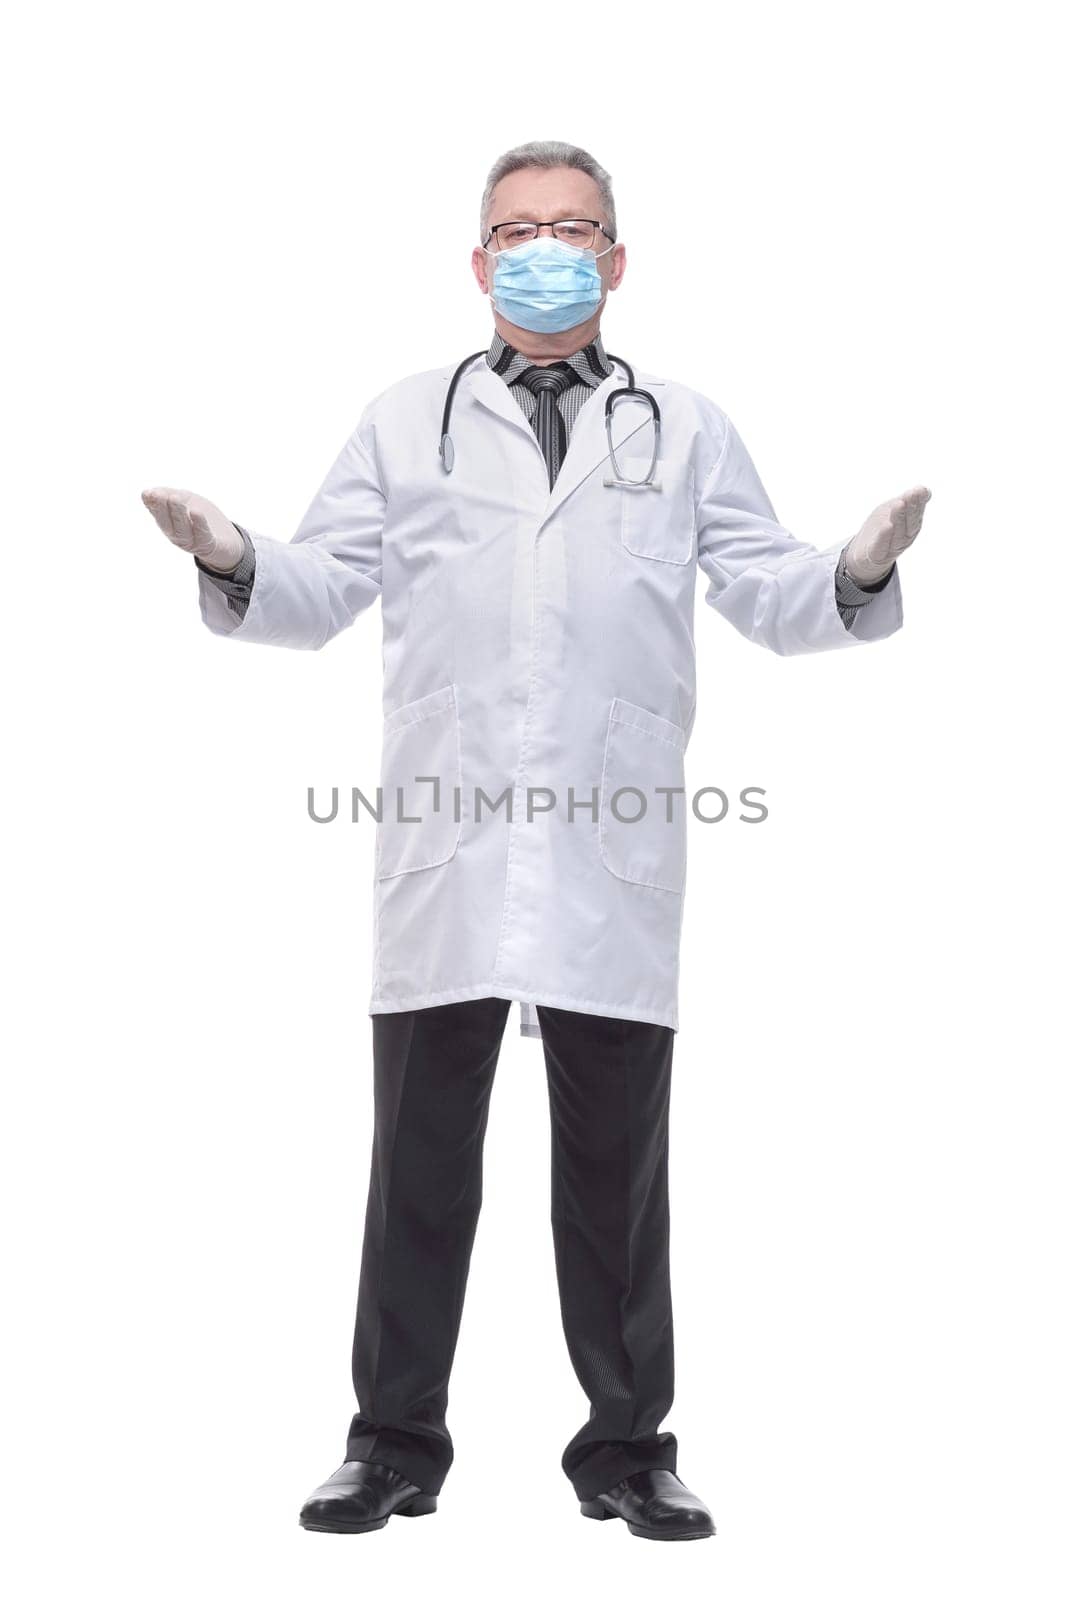 A doctor with face masks looking at camera by asdf